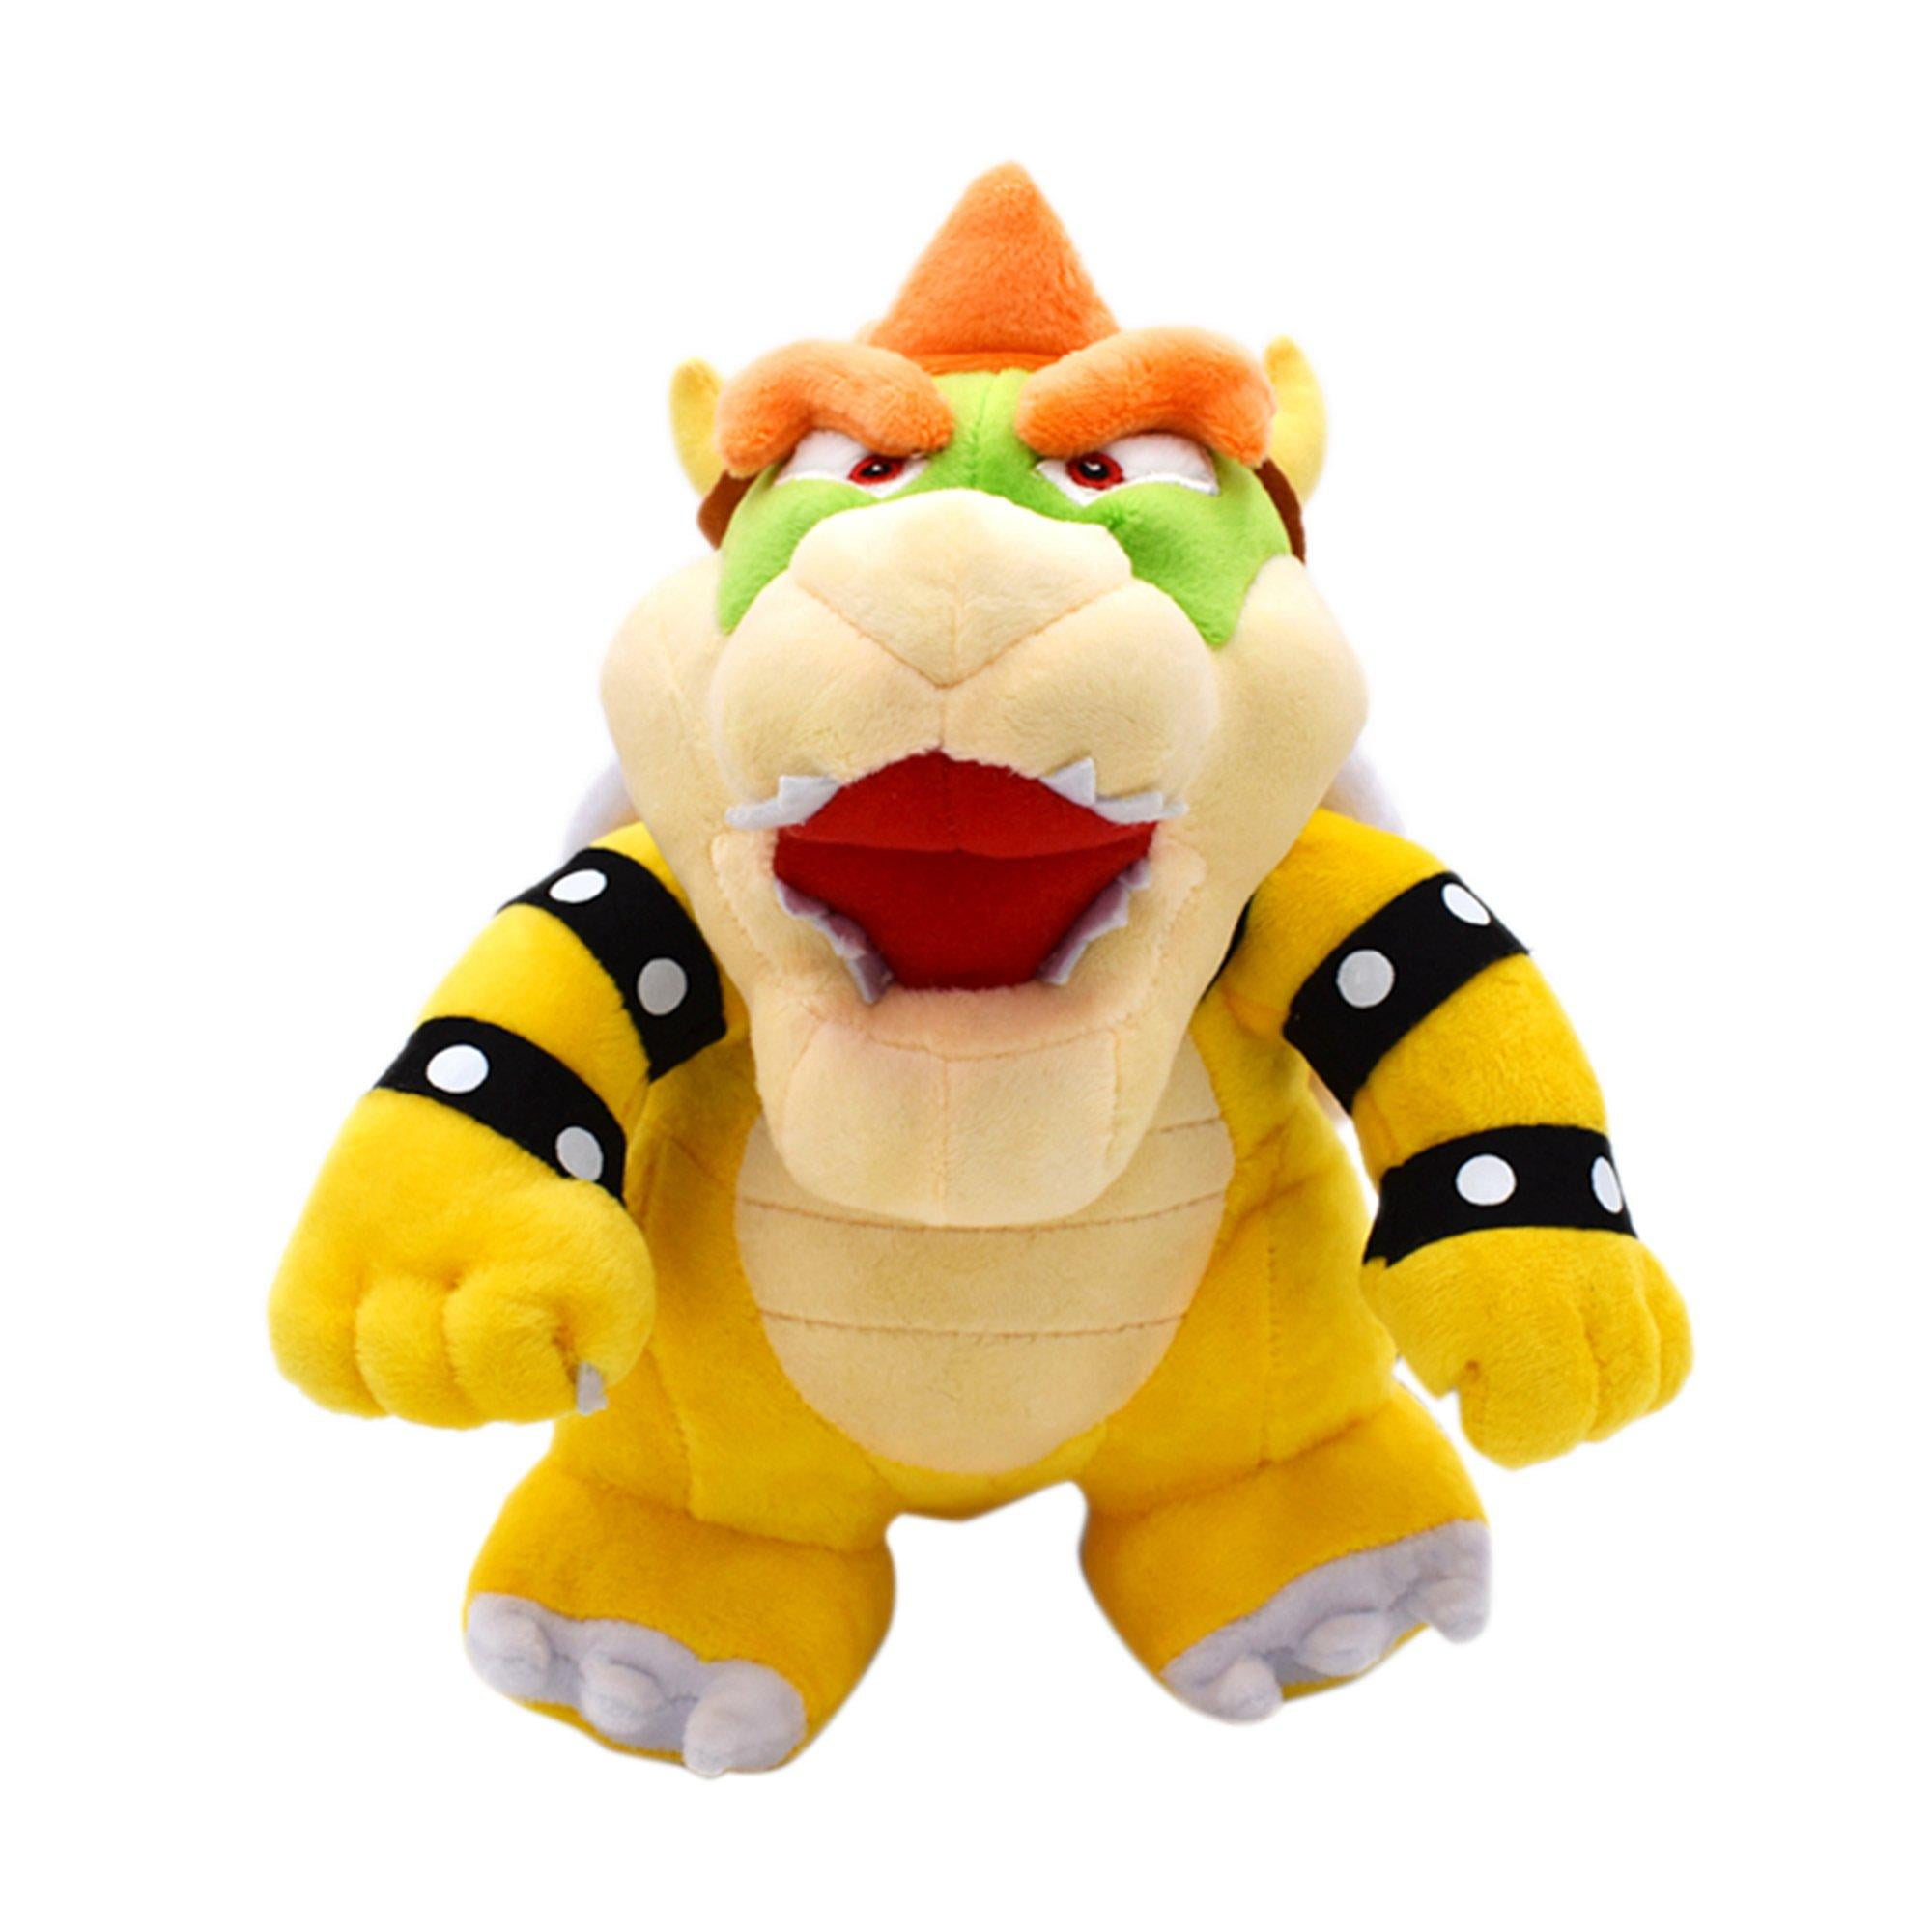 Super Mario Bros Bowser King Koopa Plush Soft Doll Figure Stuffed Toy 10" Gift for sale online 